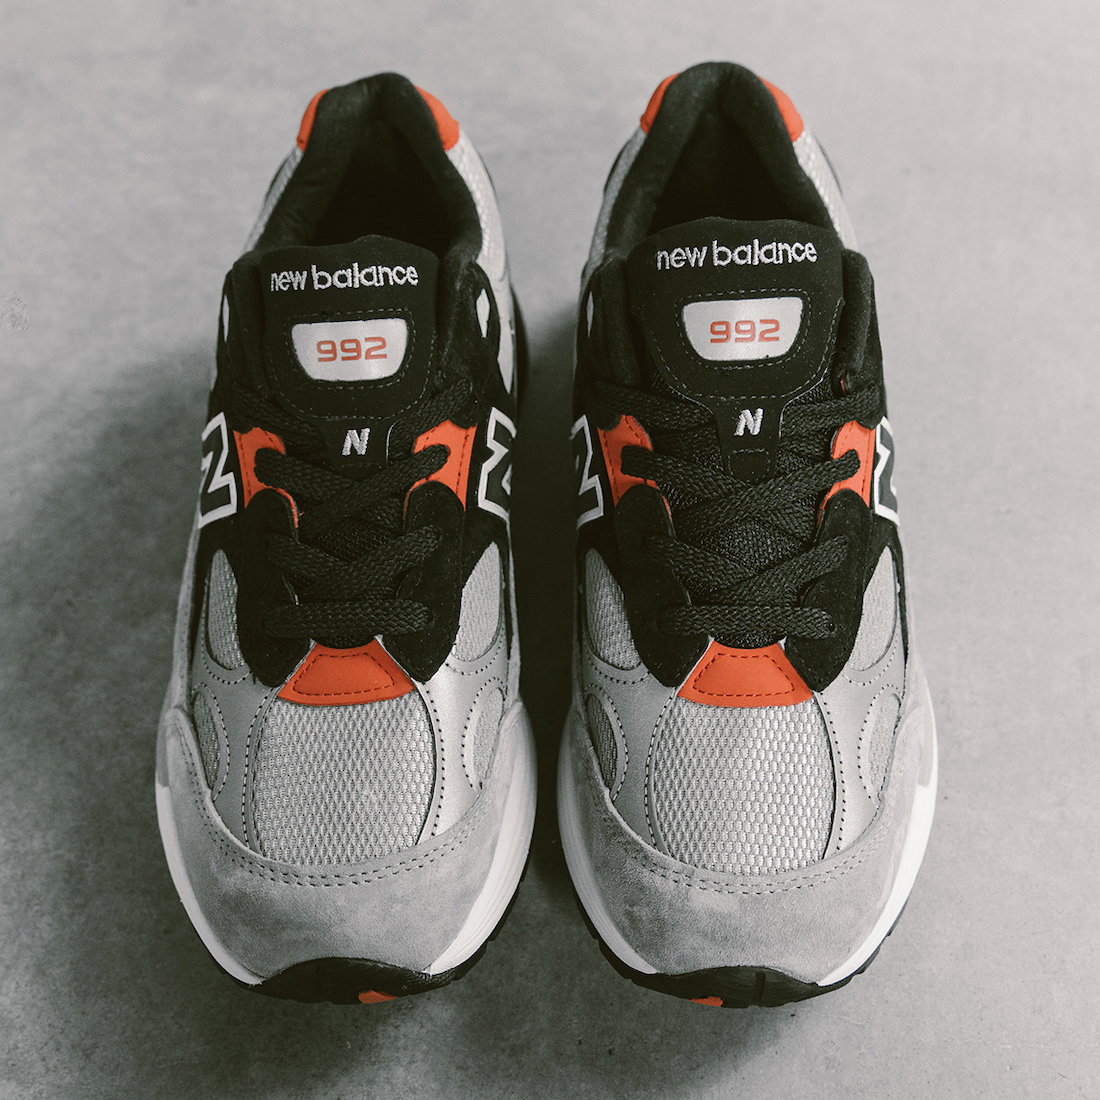 DTLR x New Balance 992 “Discover & Celebrate”